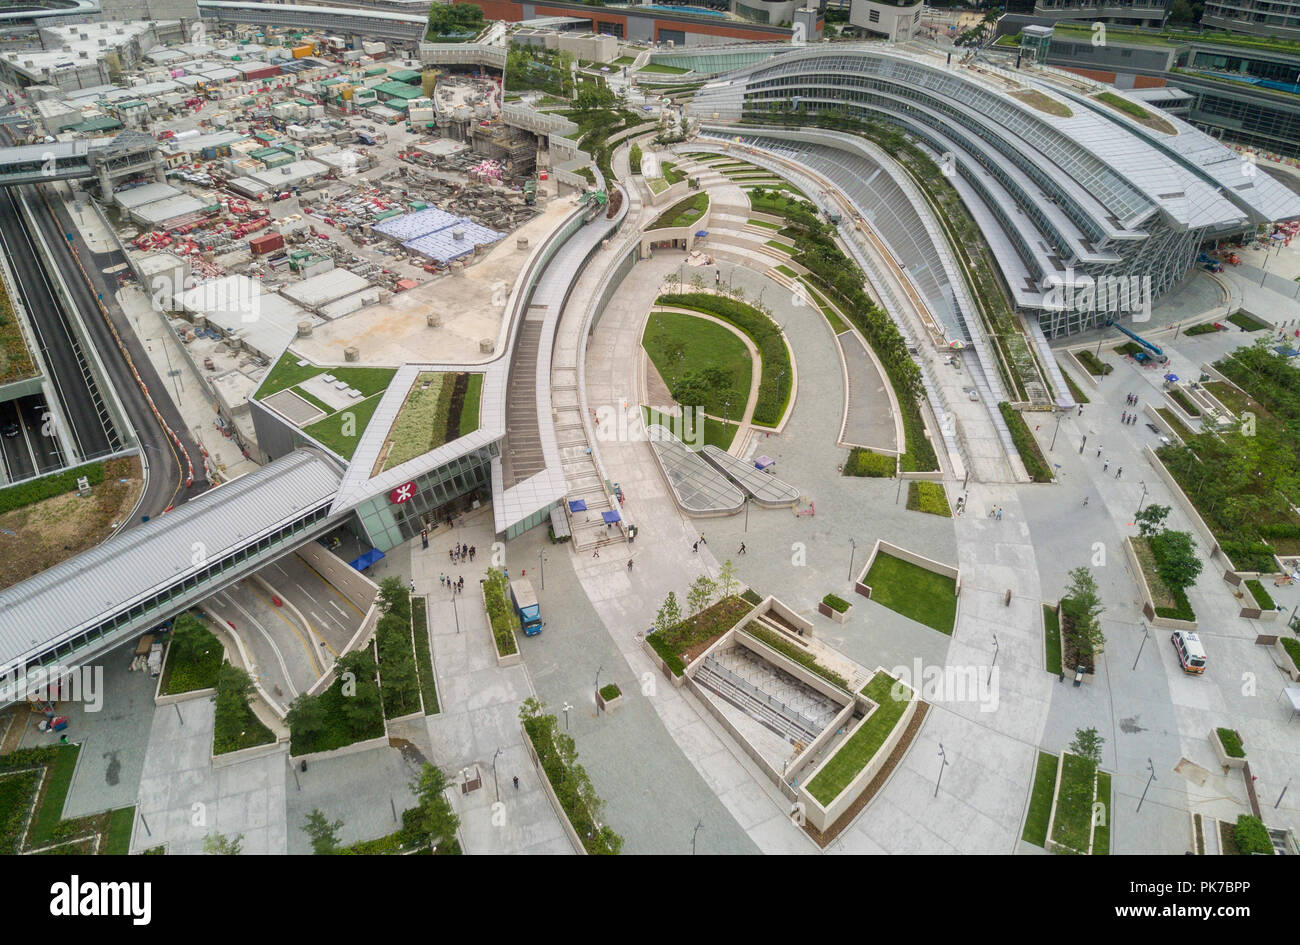 Aerial view of the Kowloon West Railway Terminus. The High Speed Rail link will start service on September 23, 2018 and connect Hong Kong West Kowloon Station to 44 stations in Mainland linking it to China's 25,000km national high speed rail network. Stock Photo